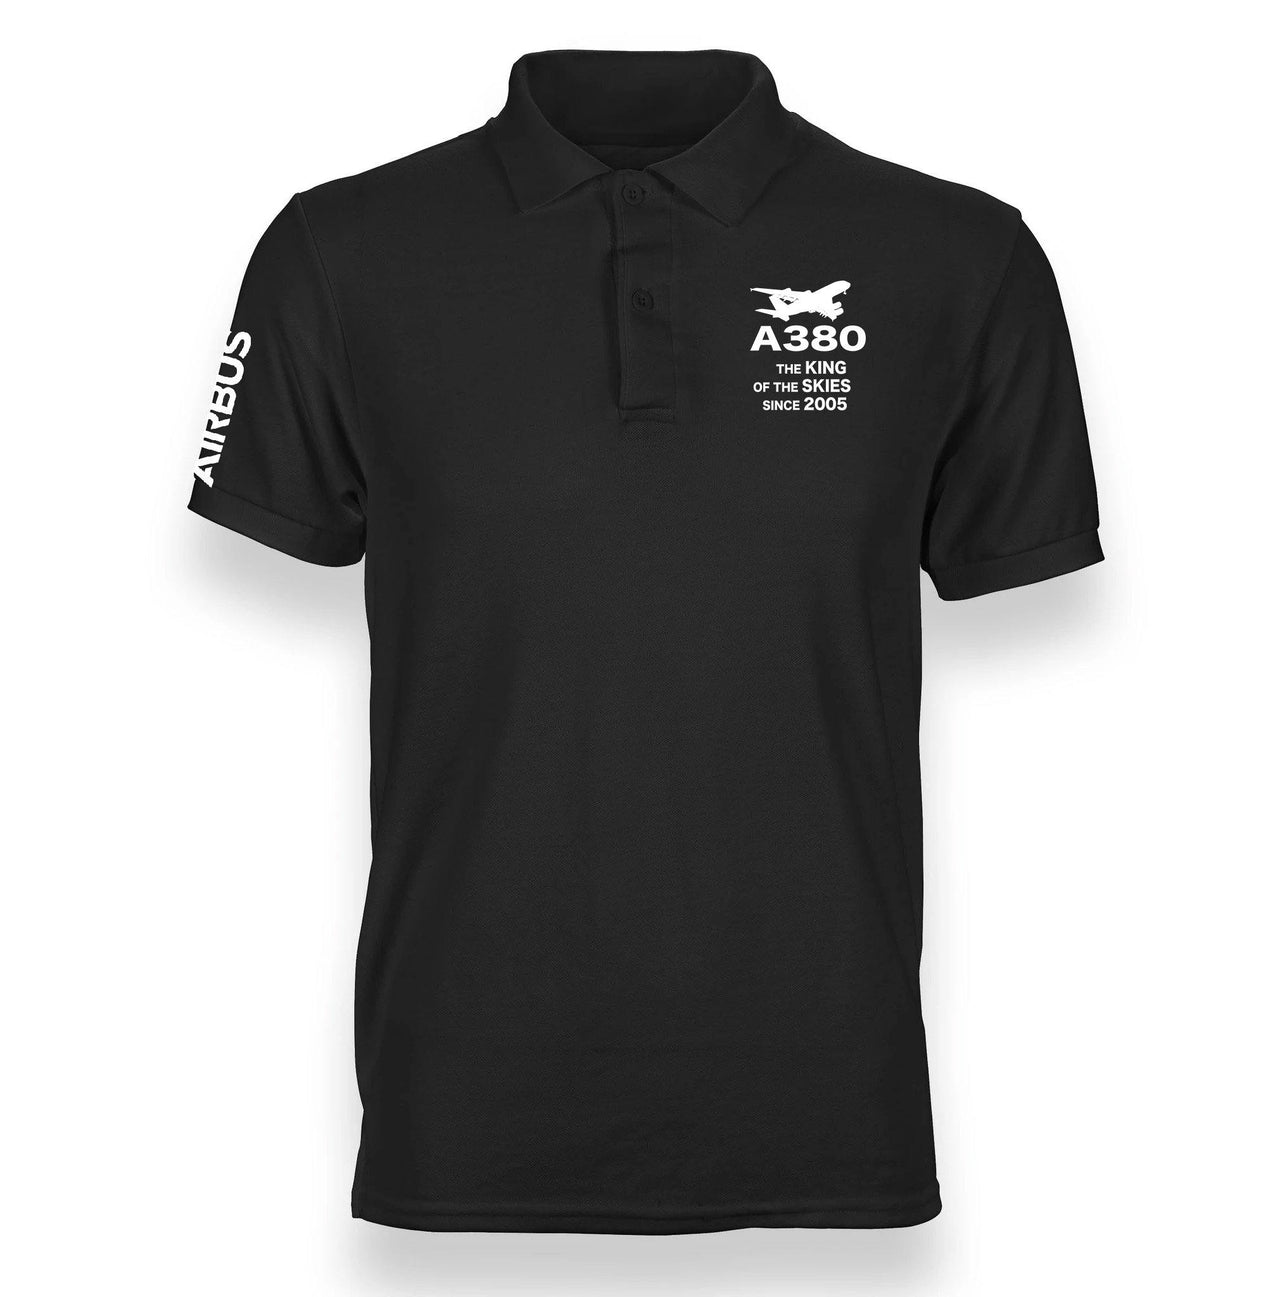 AIRBUS A380 KING OF THE SKIES SINCE 2005 DESIGNED POLO SHIRT THE AV8R